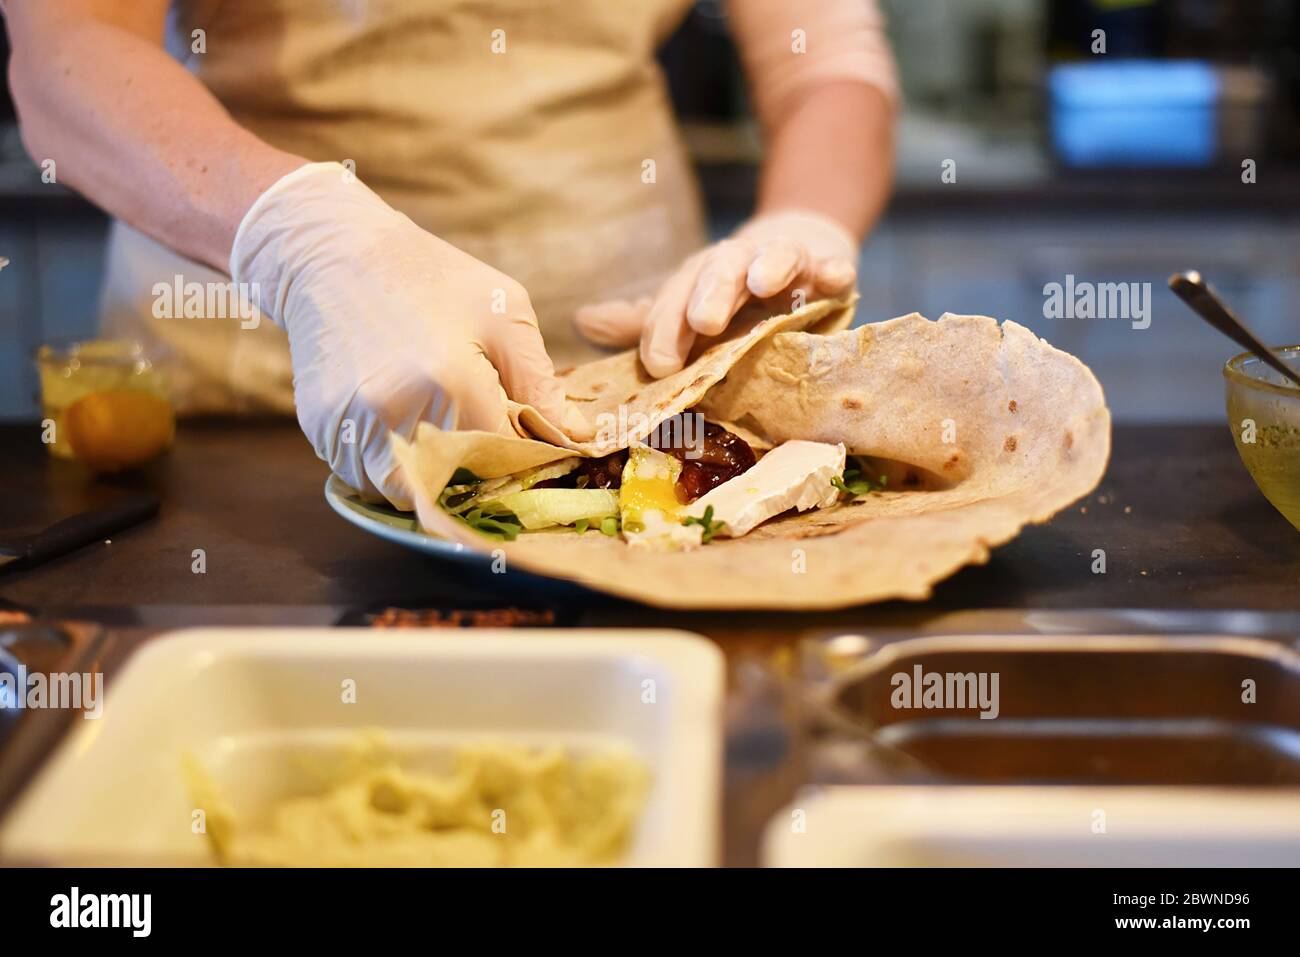 woman fills and rolls a vegetable wrap Stock Photo